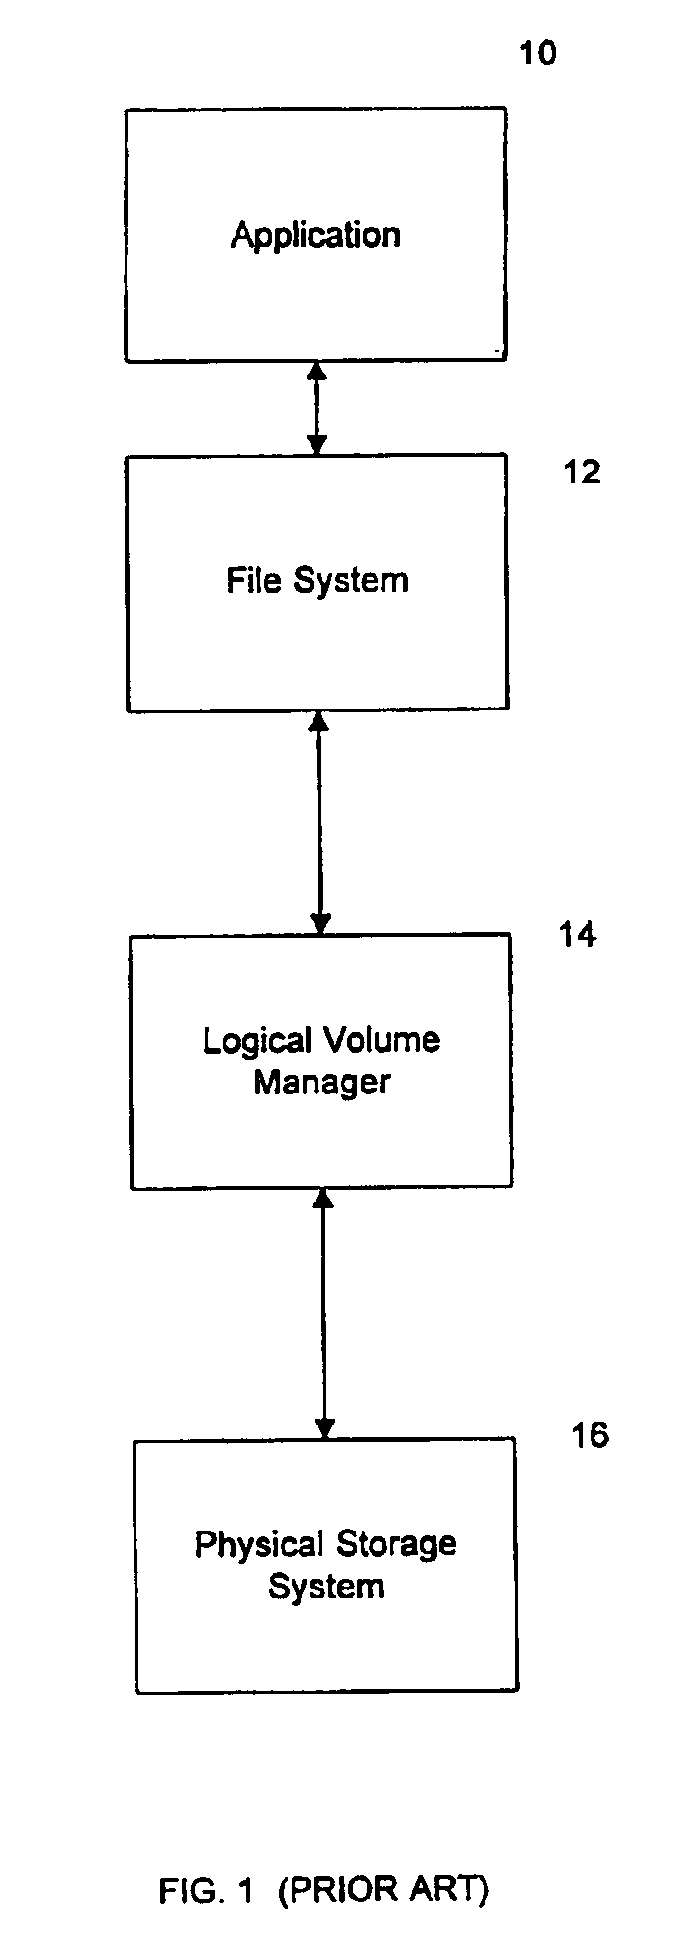 Method and apparatus for controlling read and write accesses to a logical entity